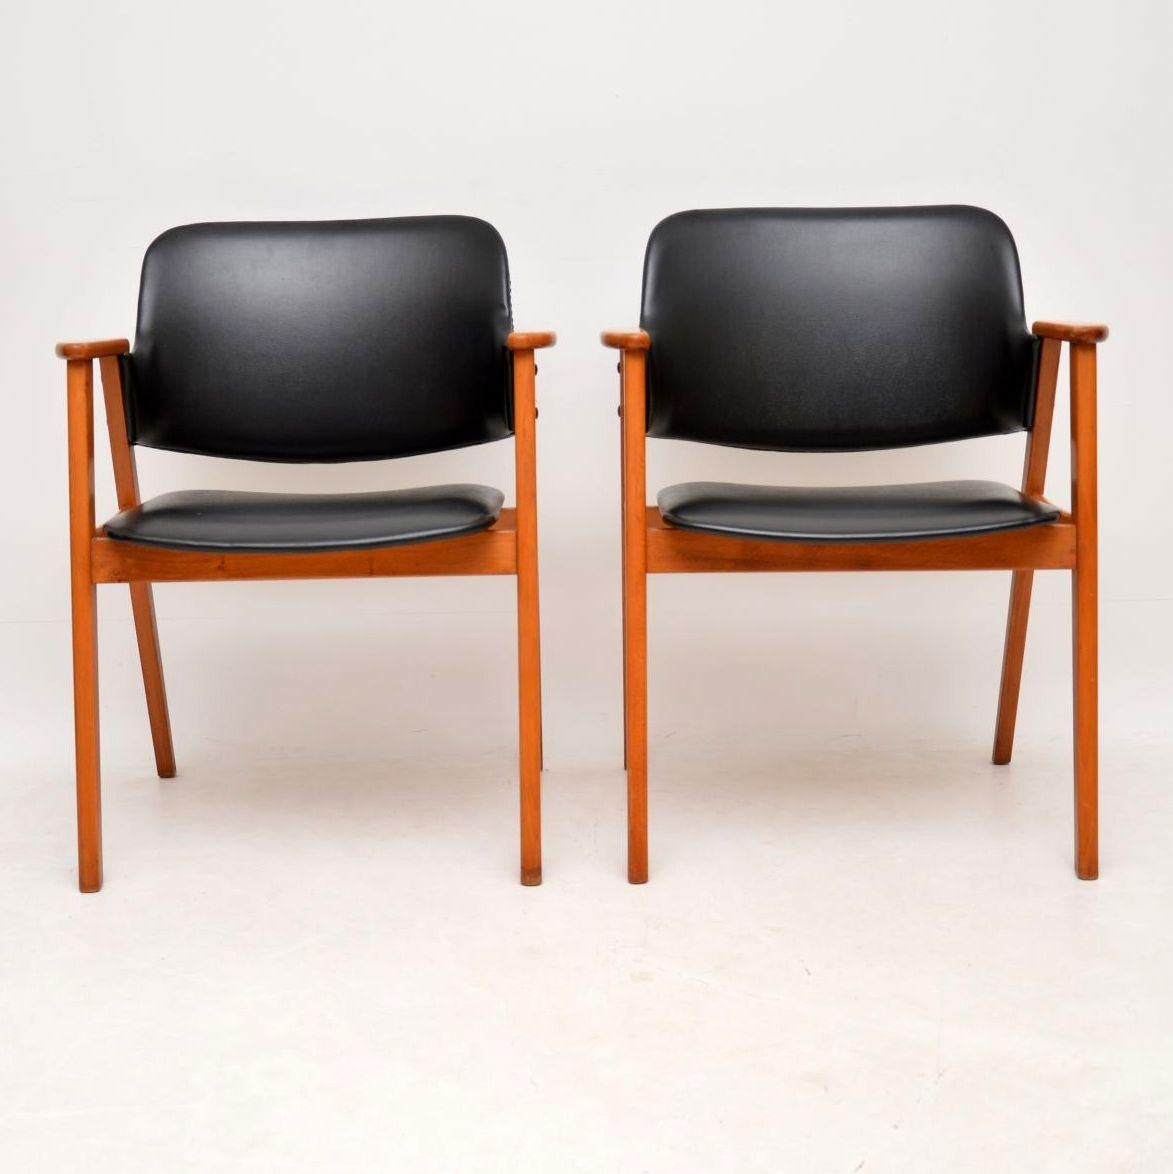 A beautifully styled and elegant pair of vintage open armchairs, these were made in Denmark, they date from the 1960s. The solid Beech frames are very clean and in good condition with only minor surface wear; the original black vinyl upholstery is